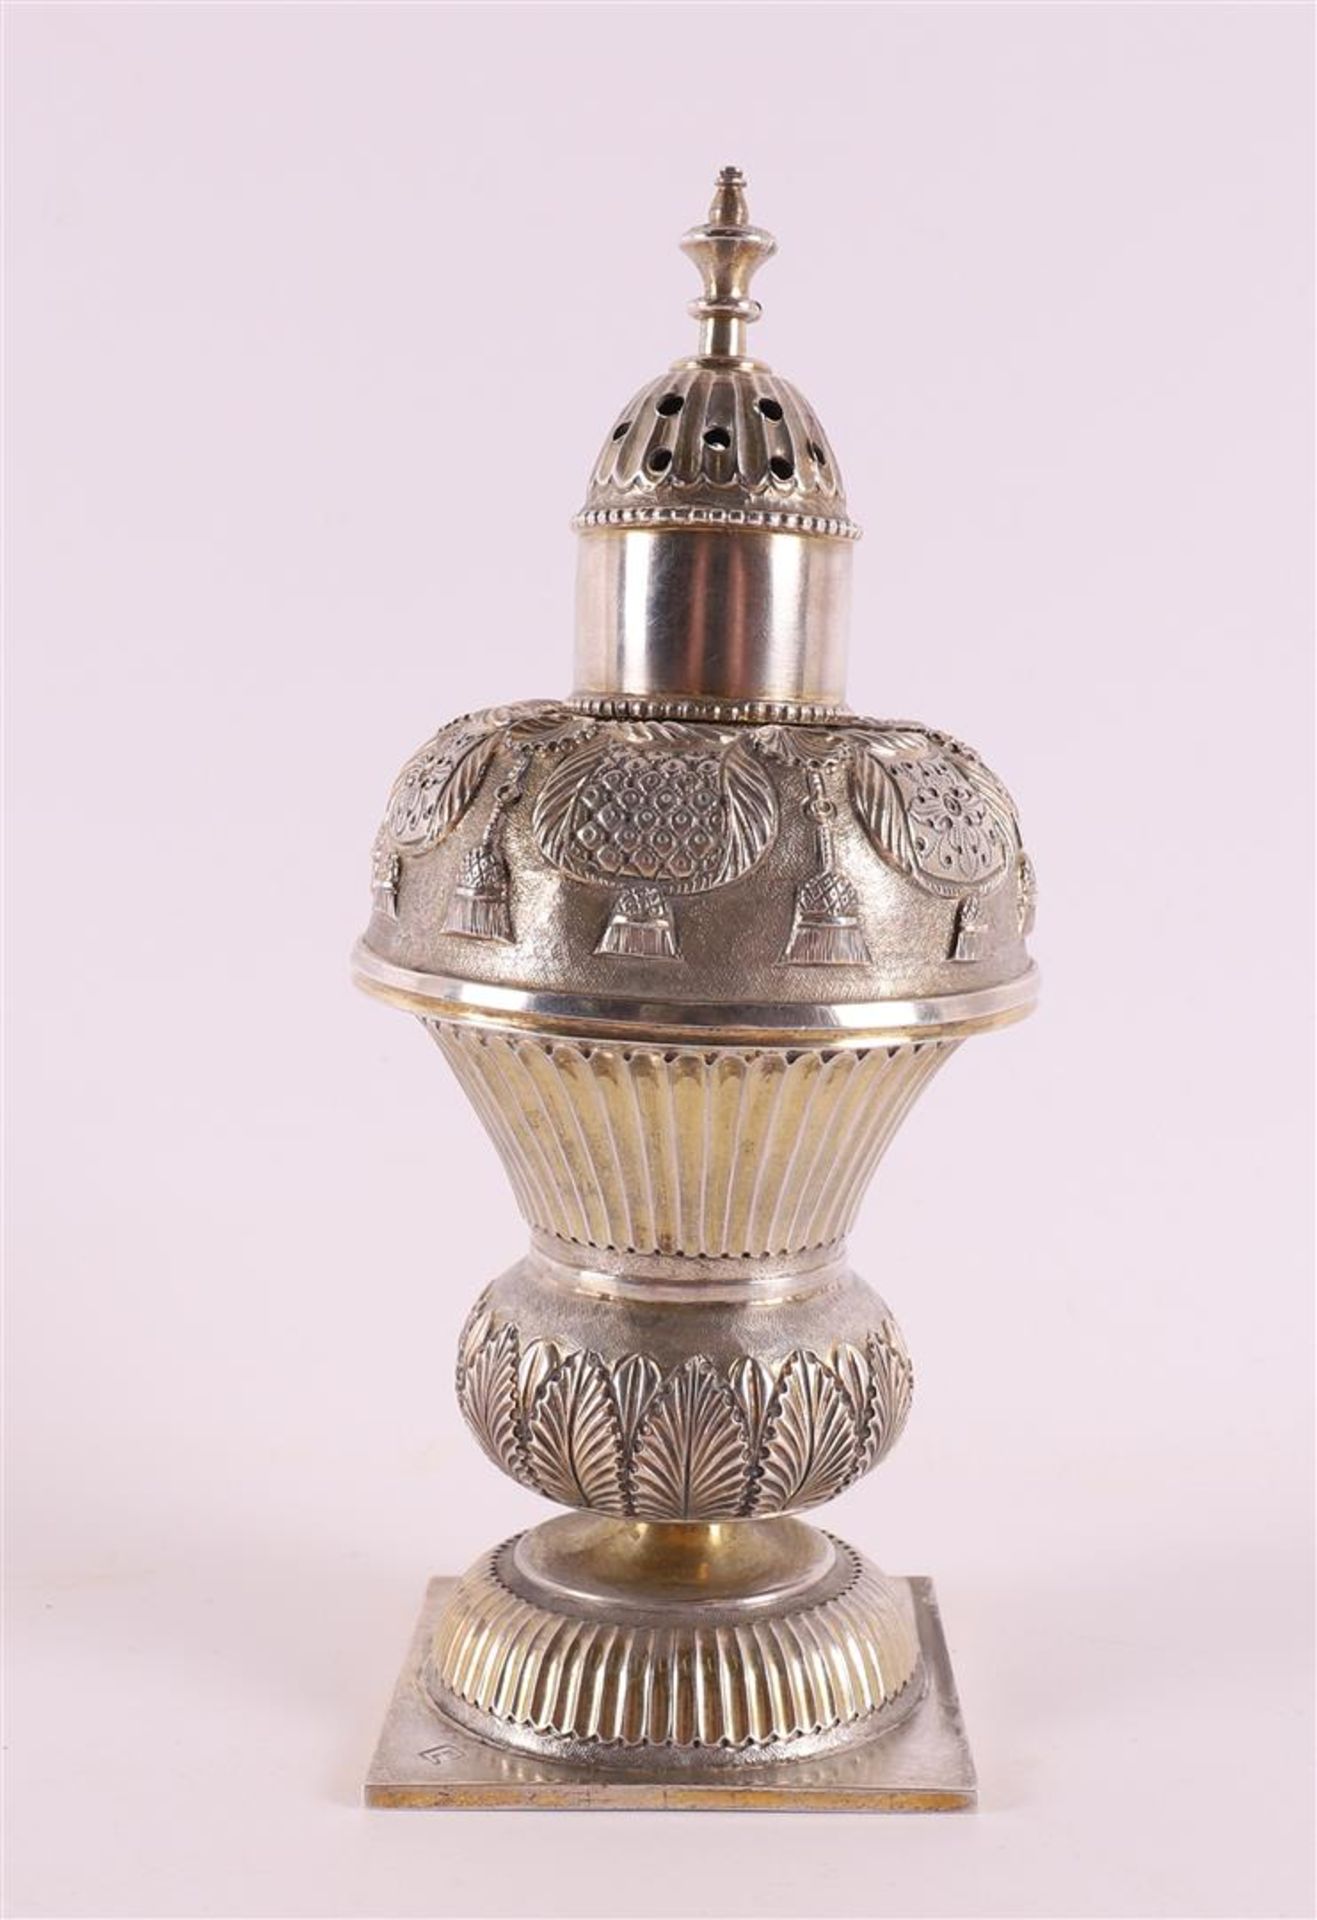 A silver sugar shaker, after an 18th century example, 19th century or later. Driven decoration of,